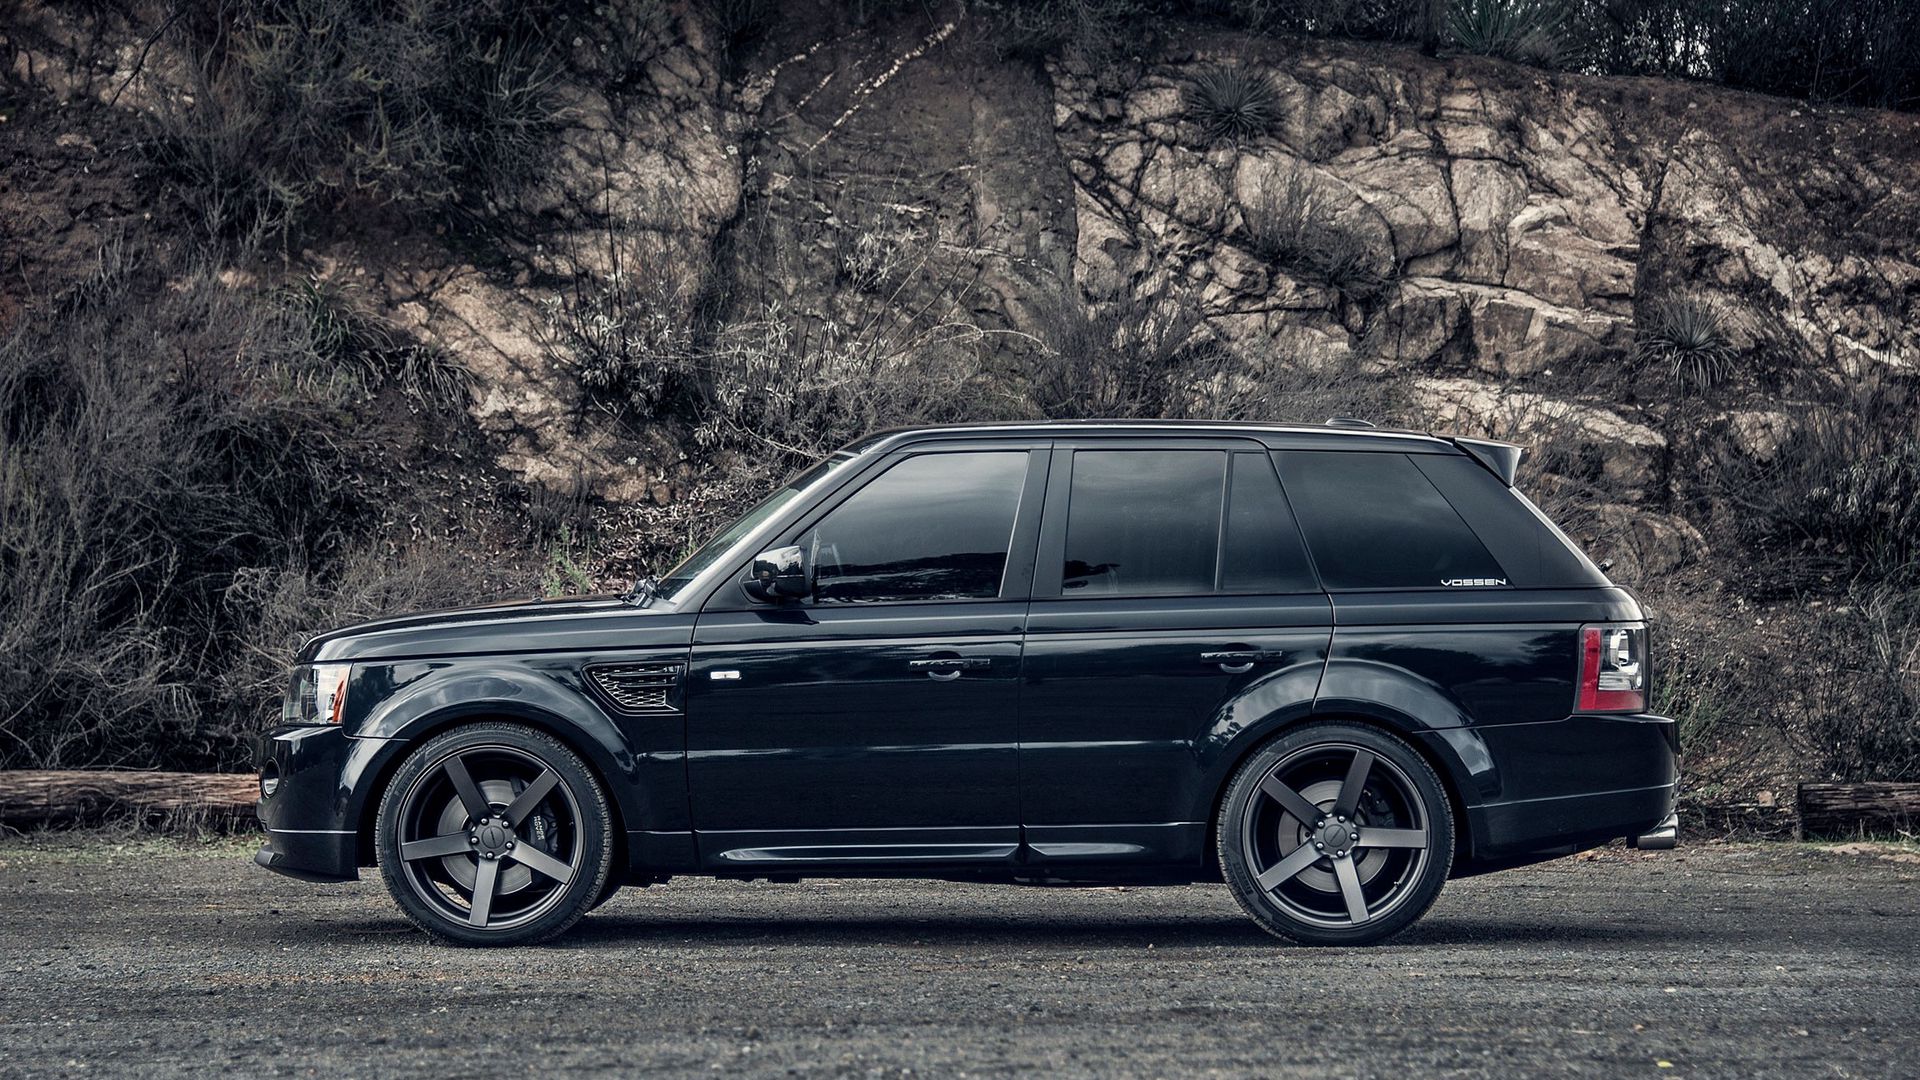 Download wallpaper 1920x1080 range rover, black, side view full hd, hdtv,  fhd, 1080p hd background